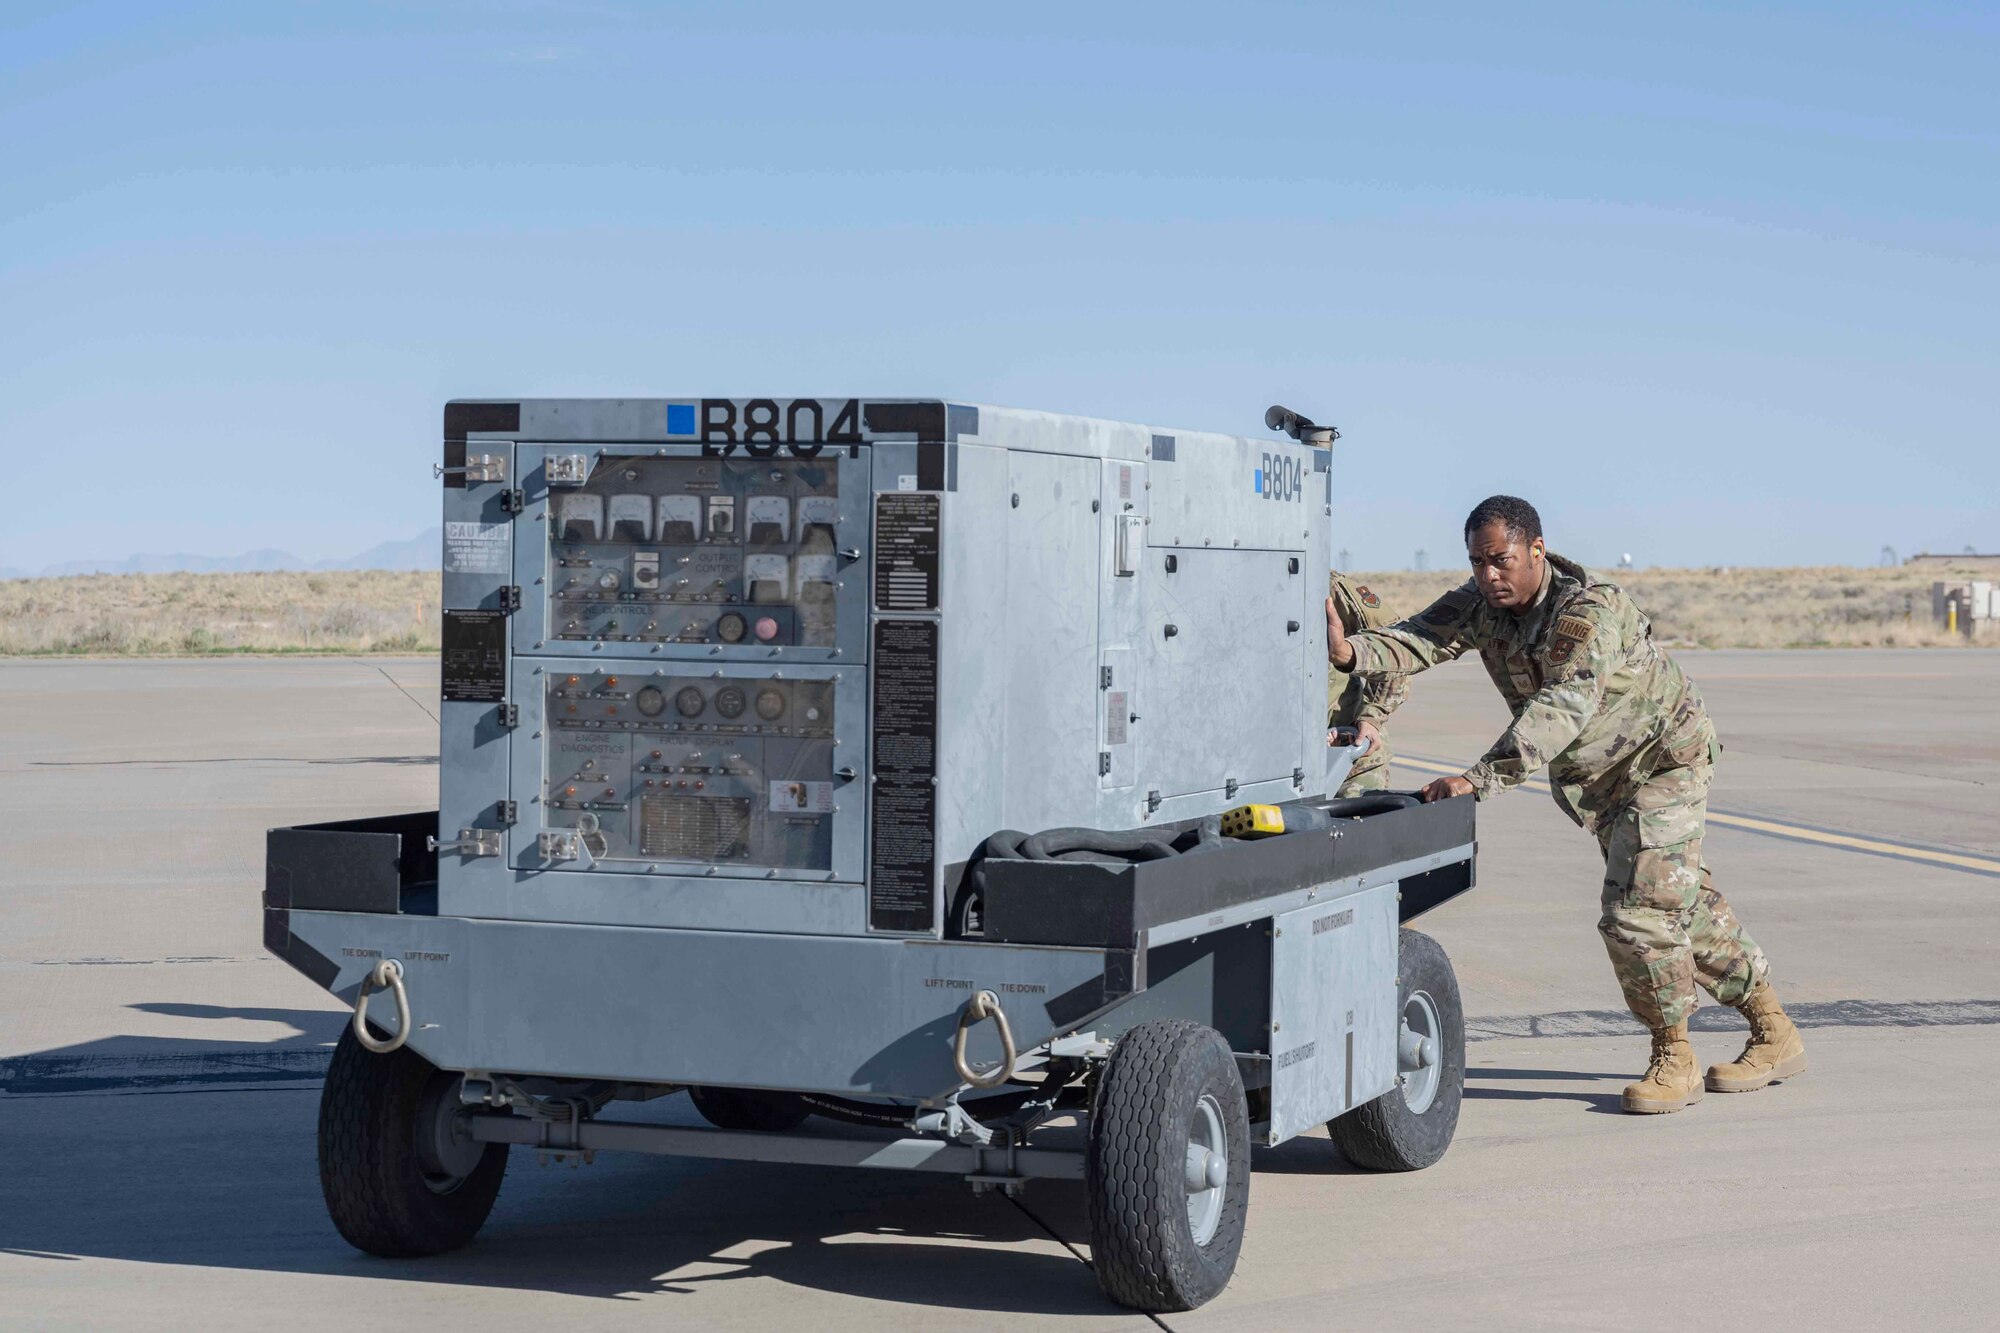 U.S. Air Force Tech. Sgt. Thaddeus Atwell, 49th Force Support Squadron unit training manager, helps an Airman from the 9th Aircraft Maintenance Unit move a B804 generator during a job swap event at Holloman Air Force Base, New Mexico, April 28, 2023. The B804 generator provides the MQ-9 Reaper with a variety of power voltages to ensure proper take-off procedures. (U.S. Air Force photo by Senior Airman Antonio Salfran)